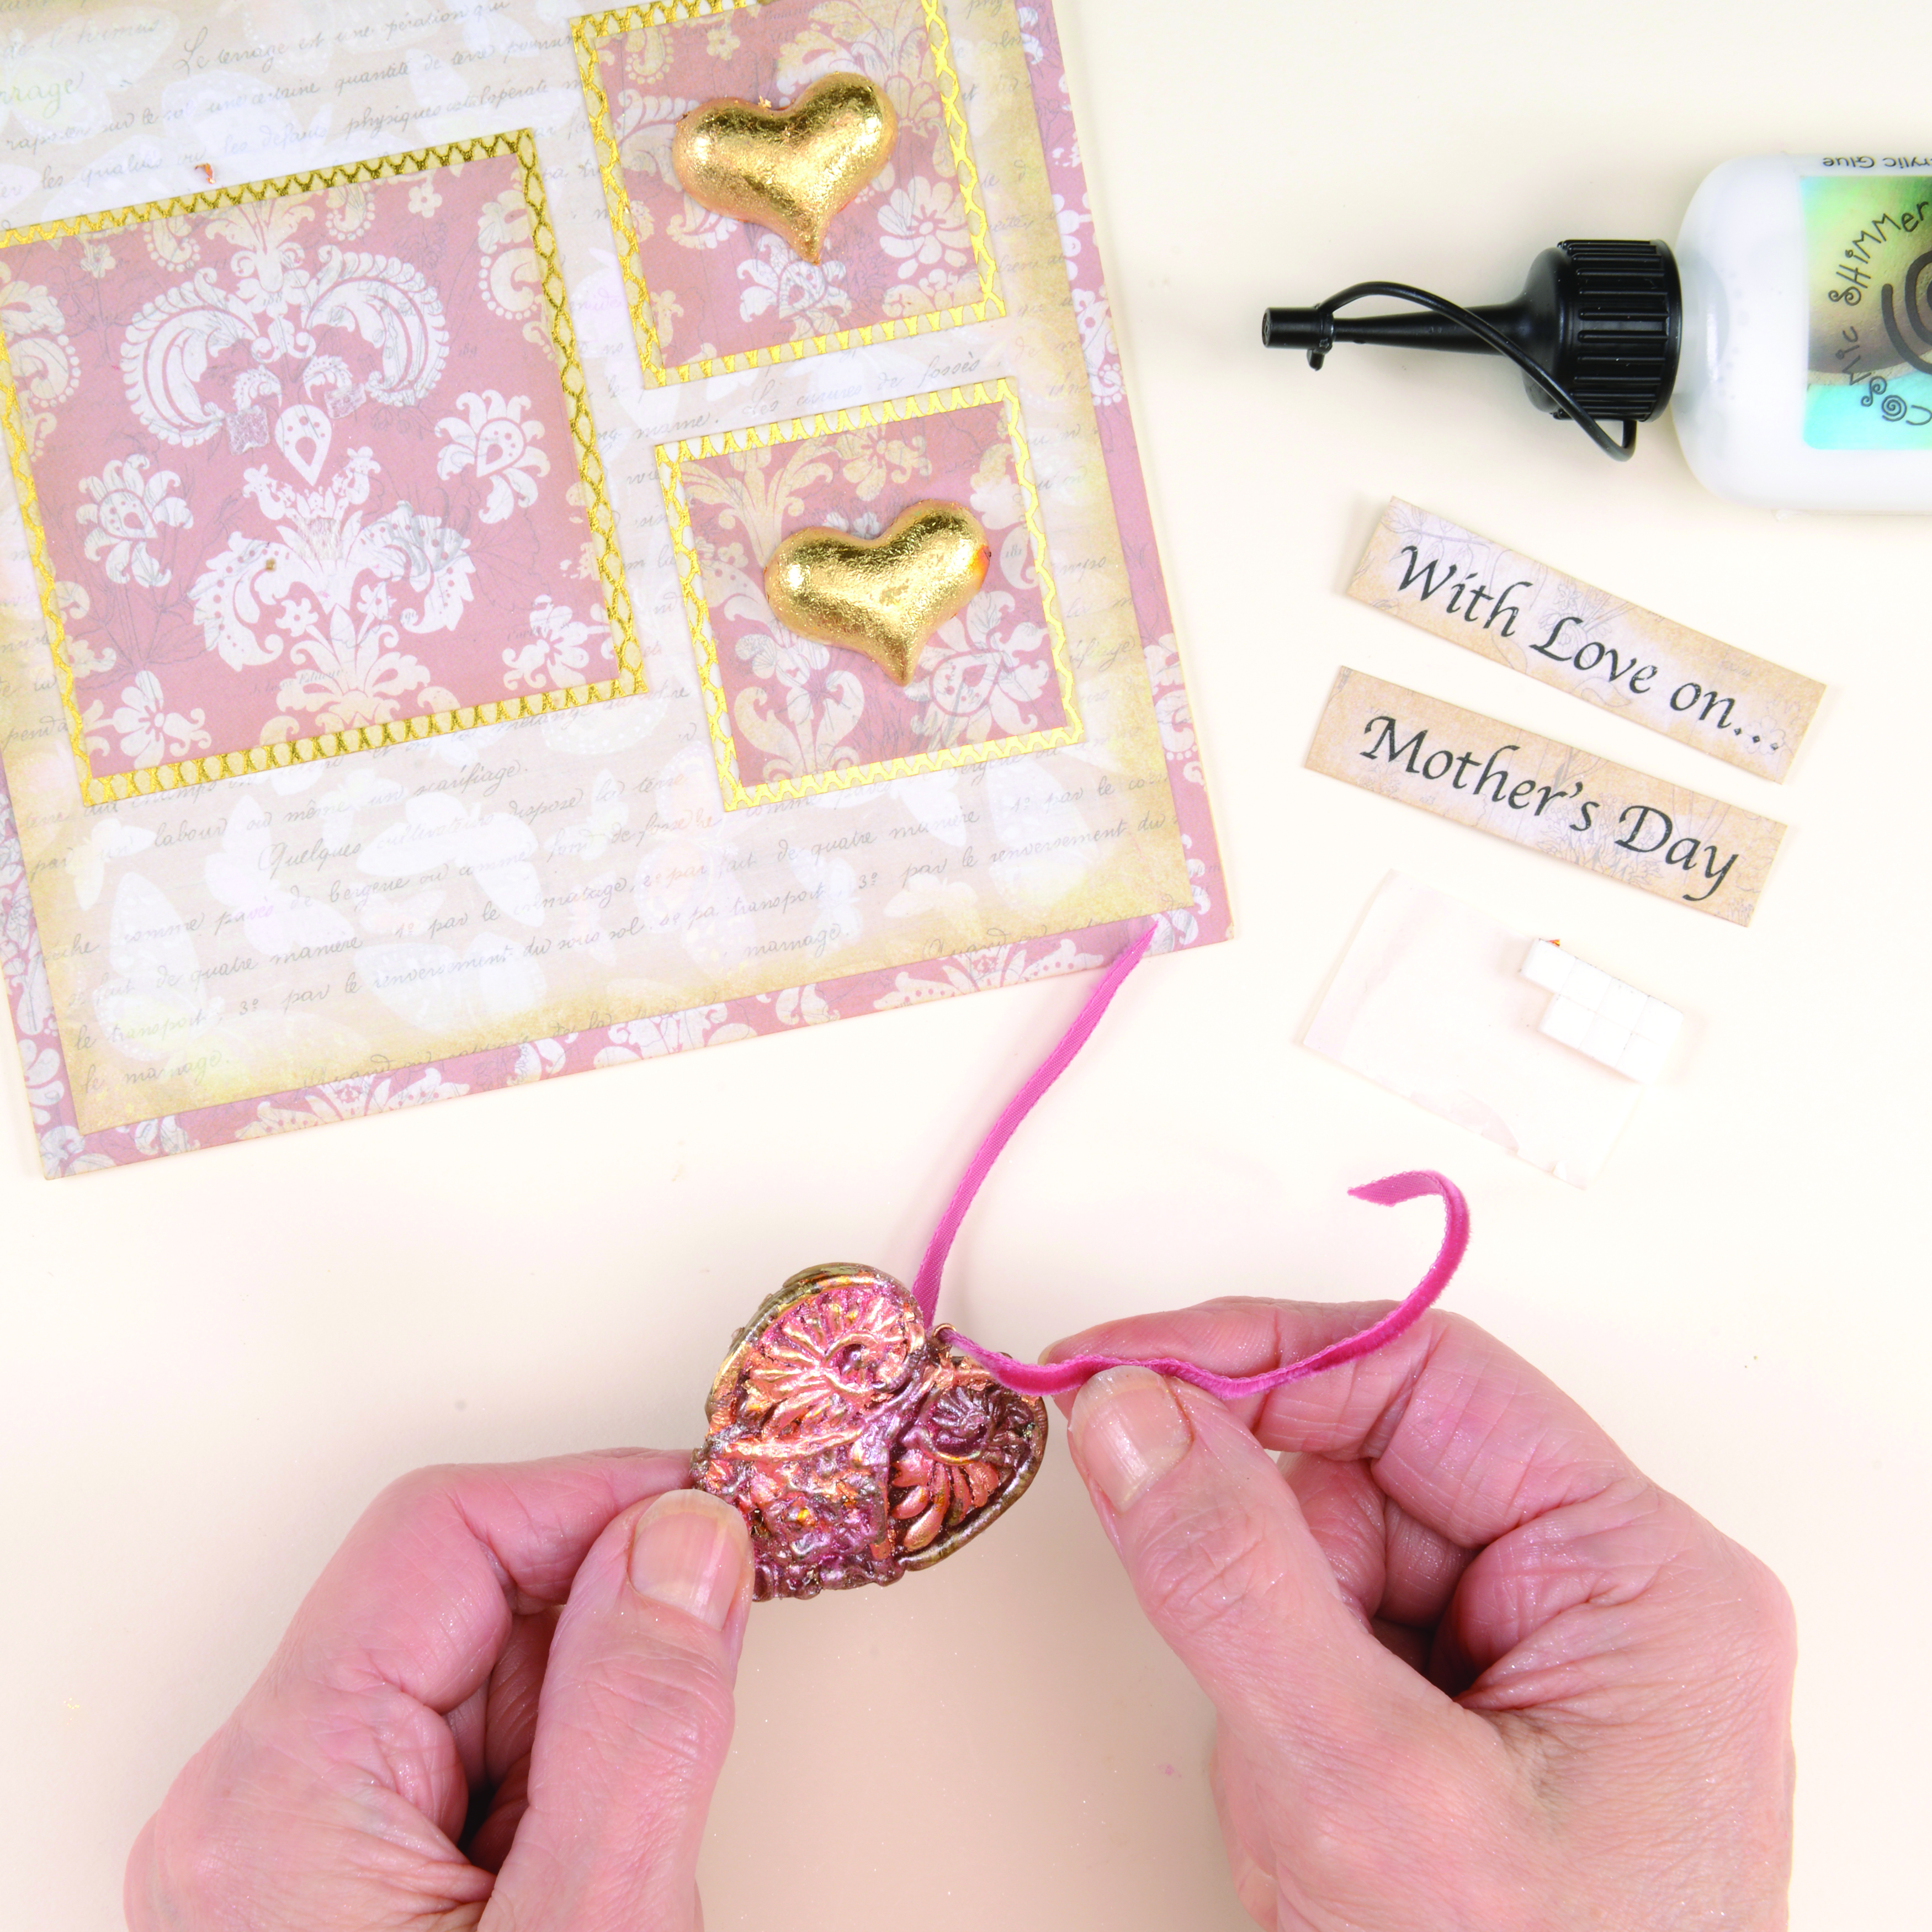 How to make 3d embellishments – step 12